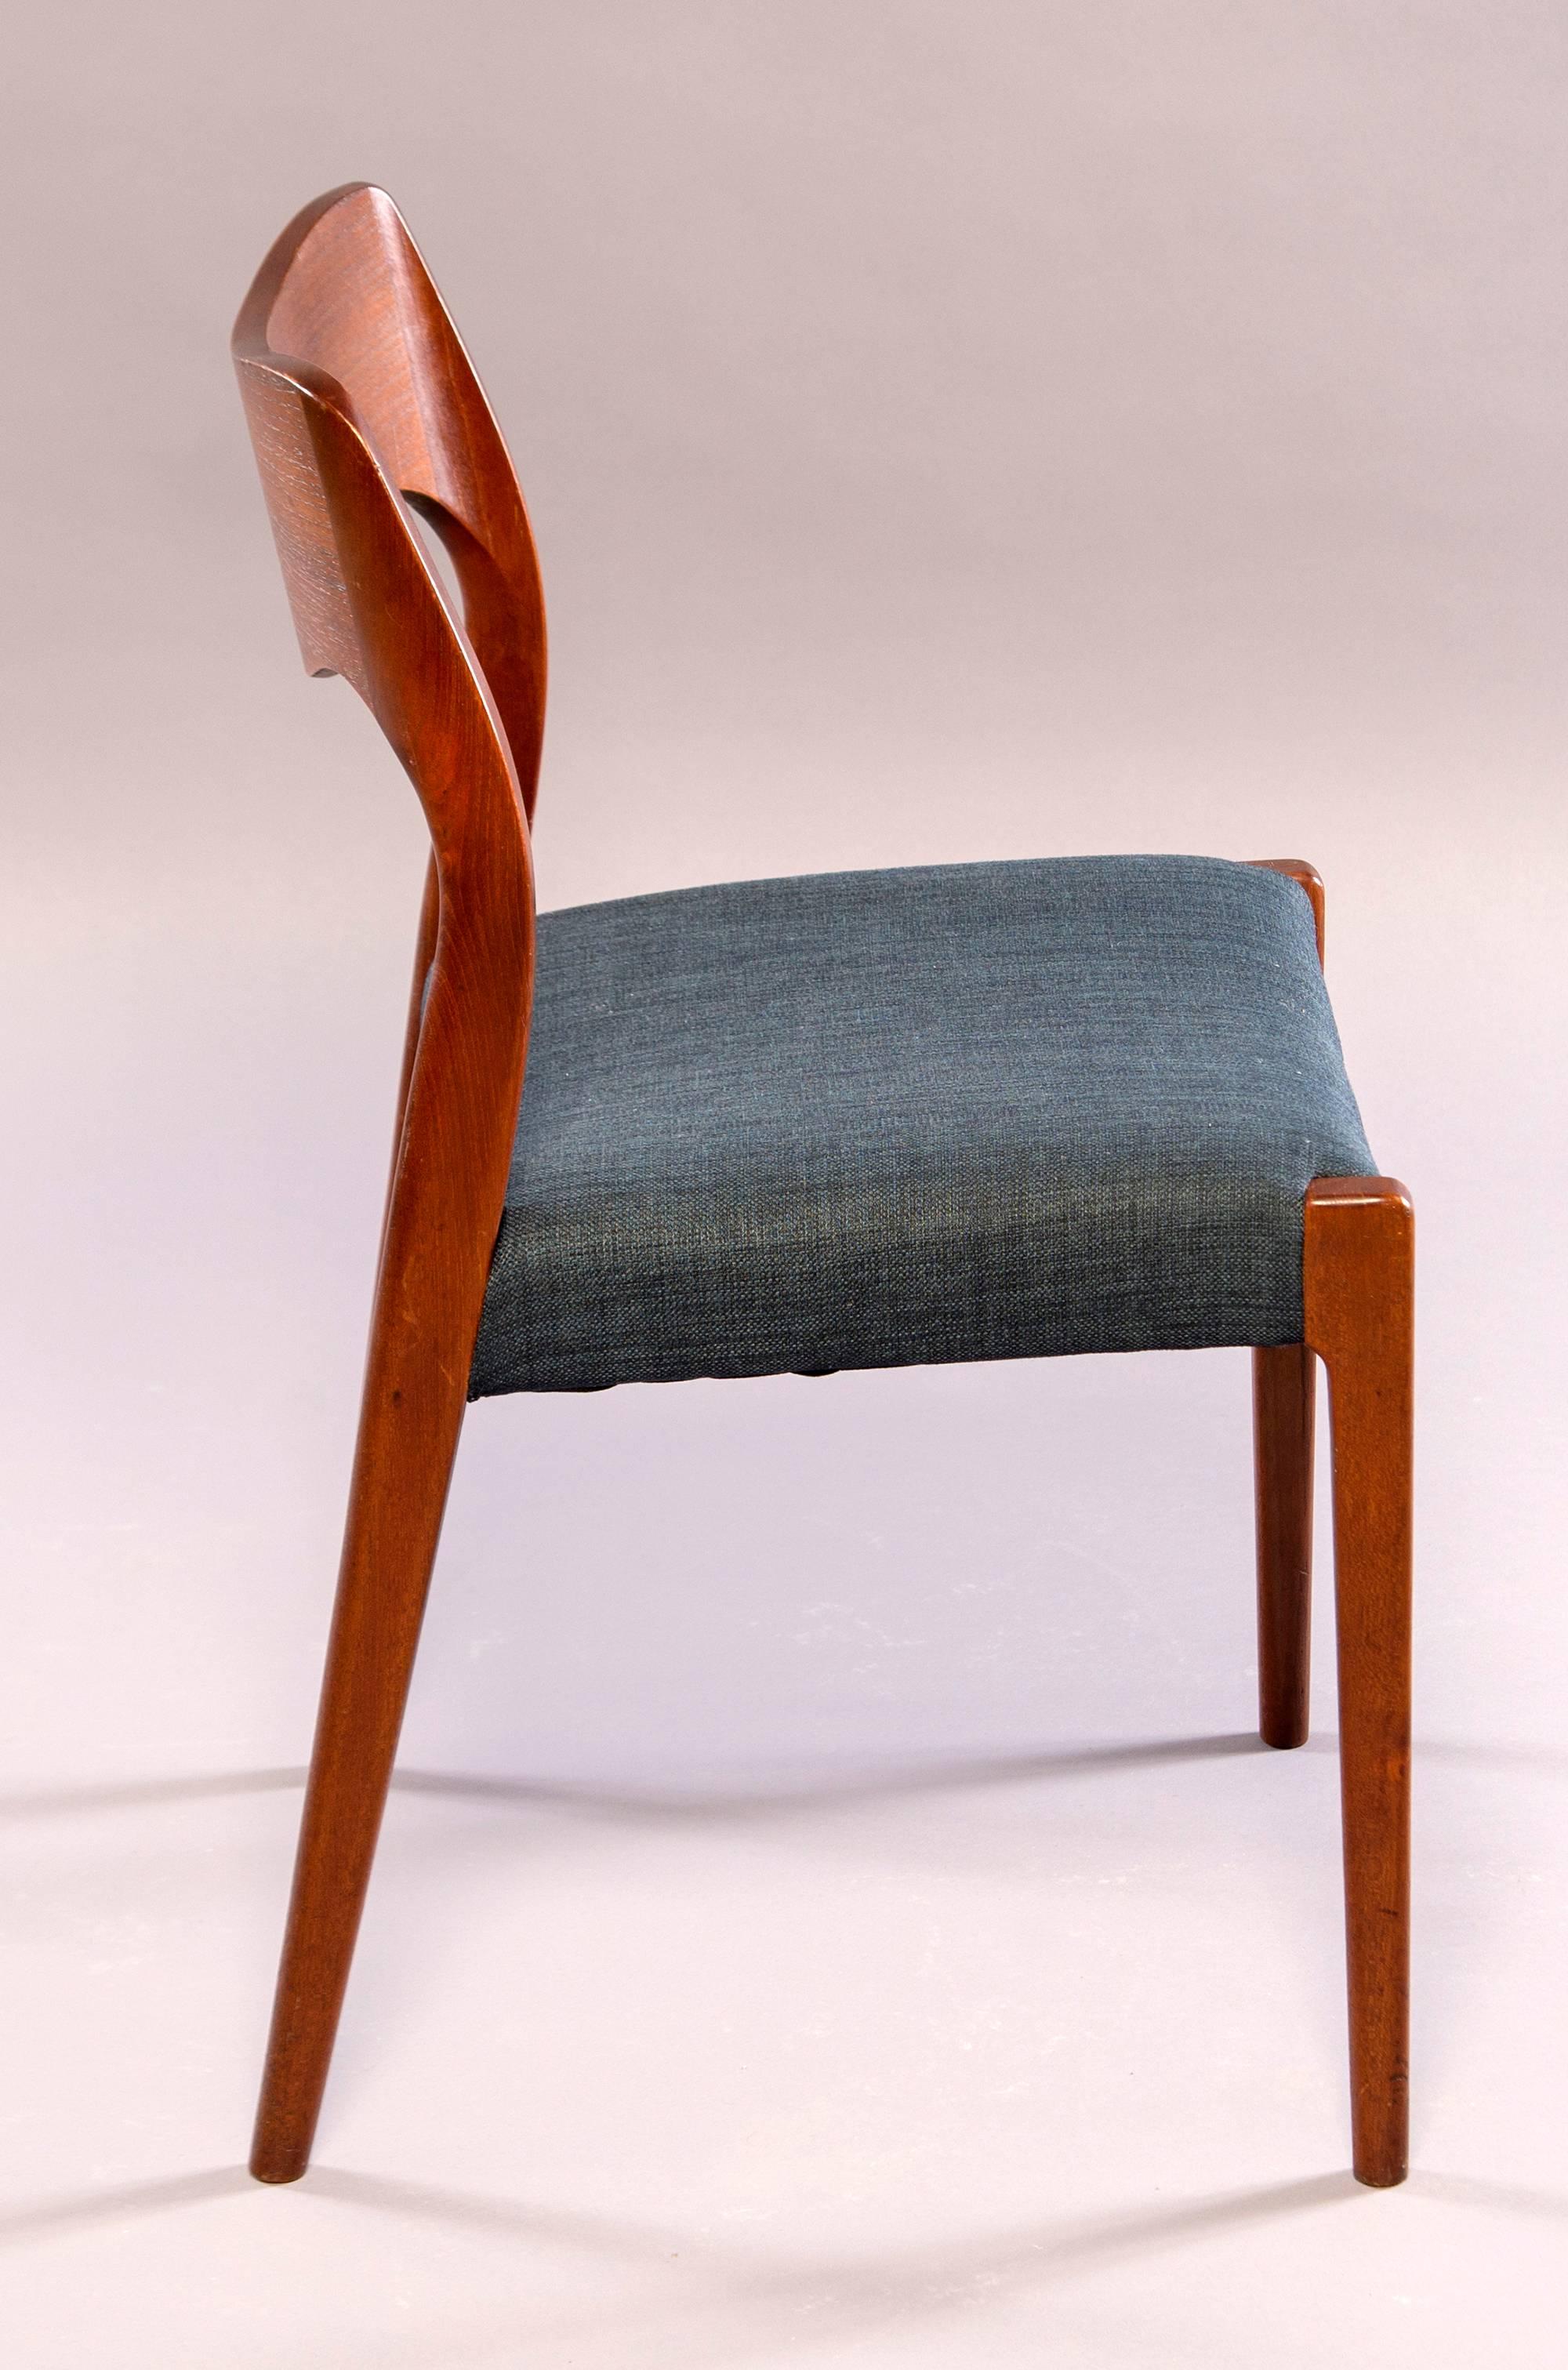 Set of four Danish midcentury teak dining chairs, circa 1960s. Unknown maker. Newly upholstered in medium blue fabric. Measure: Seats are 17.25” high and 16” deep. Sold and priced as a set.